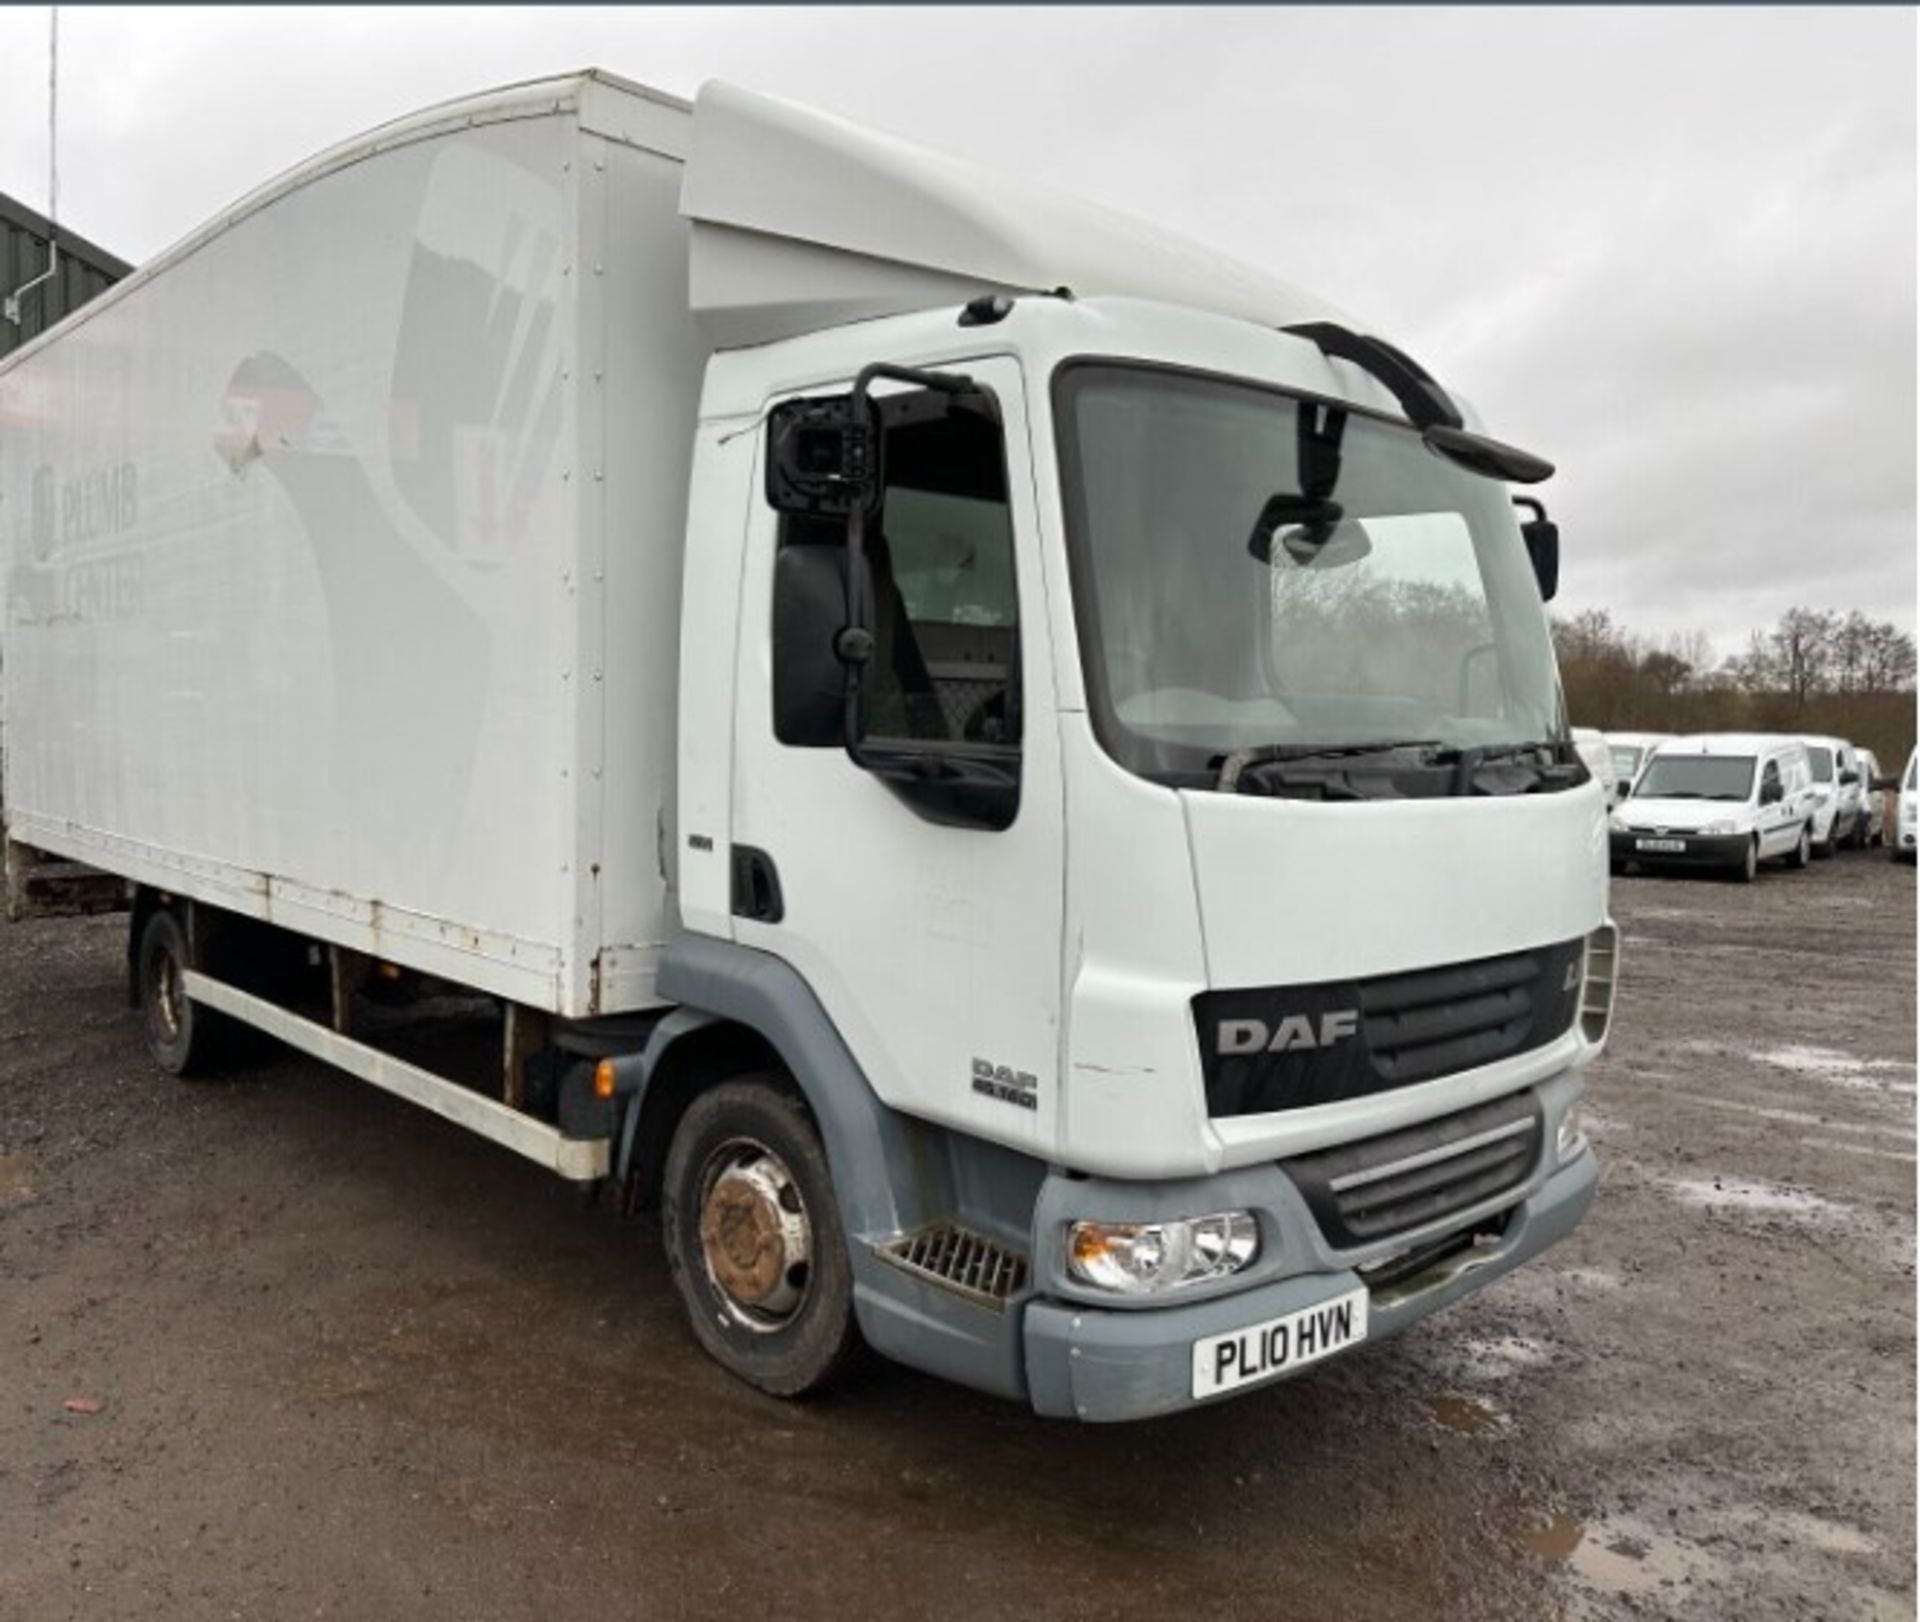 RELIABLE WORKHORSE: 2010 LF DAF TRUCK 7.5T - READY FOR EXPORT >>--NO VAT ON HAMMER--<<